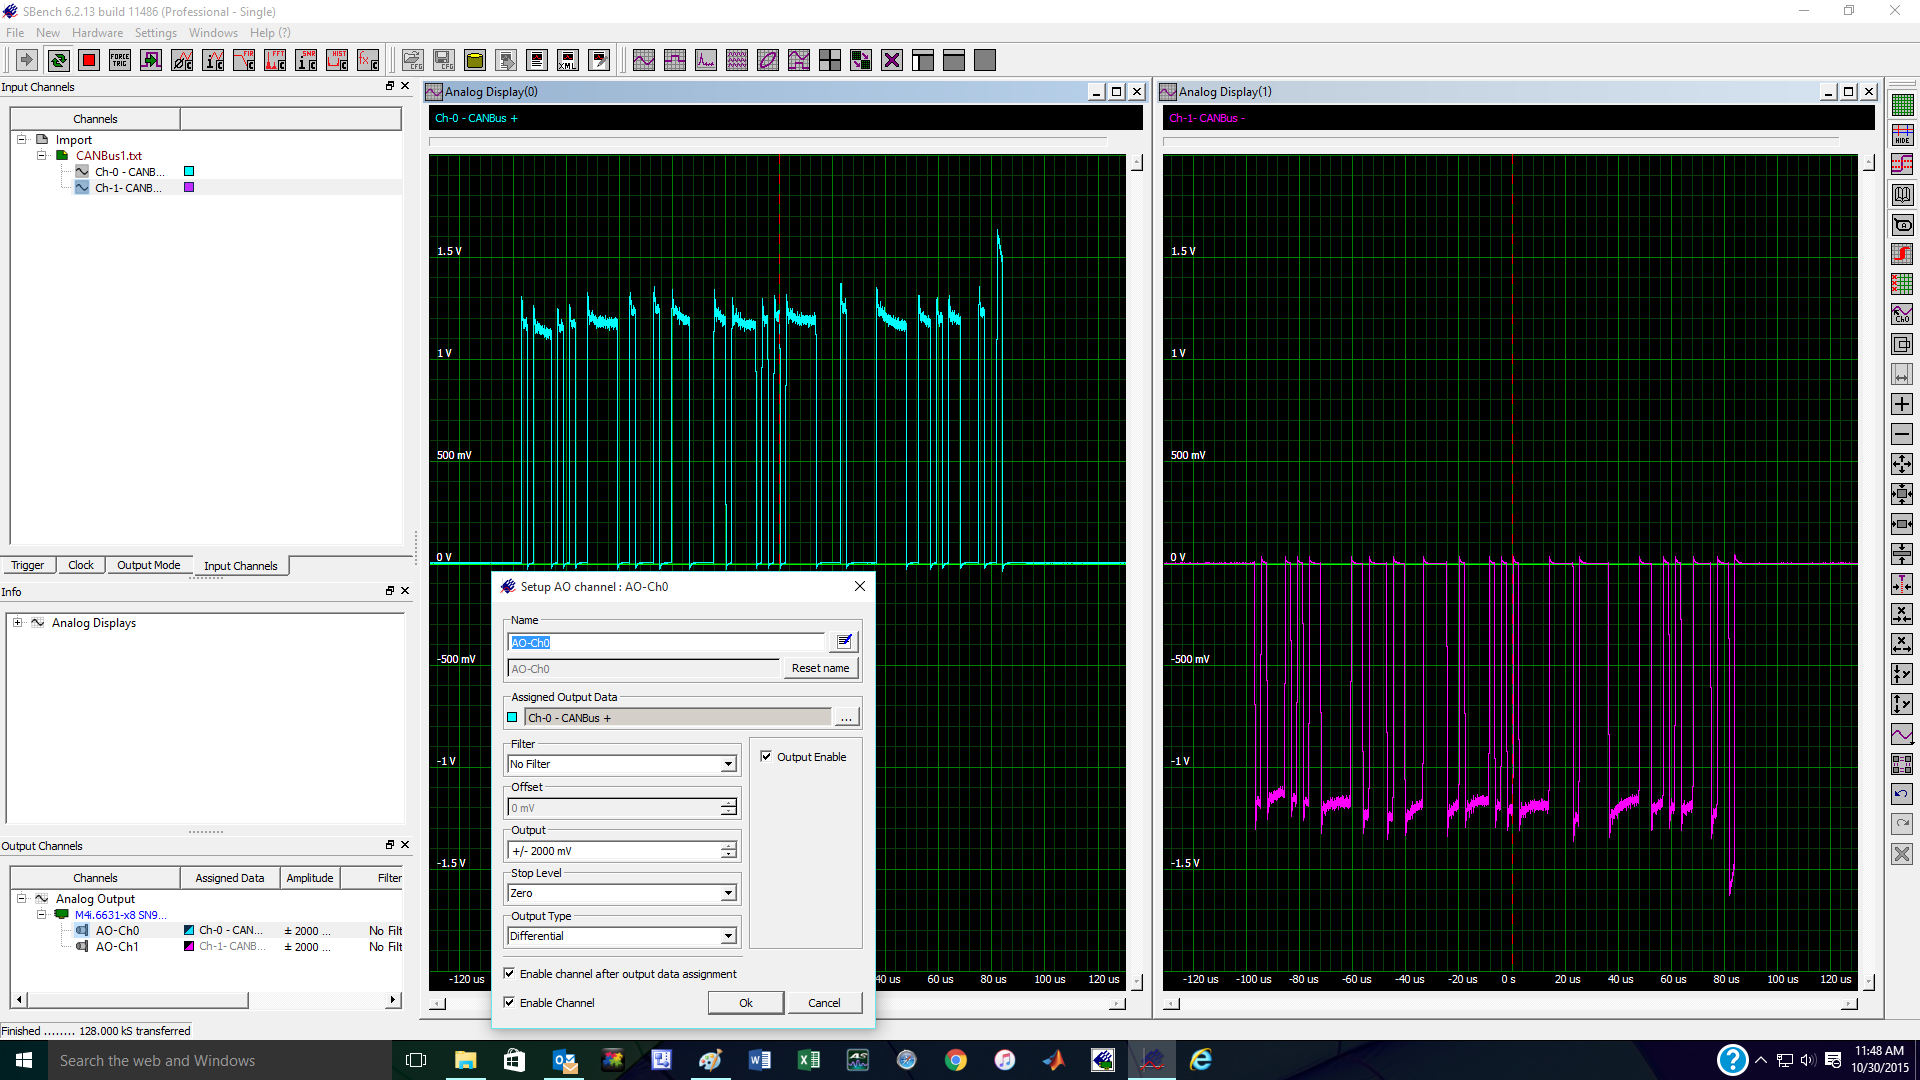 SBench 6 screenshot showing CANBus data acquisition